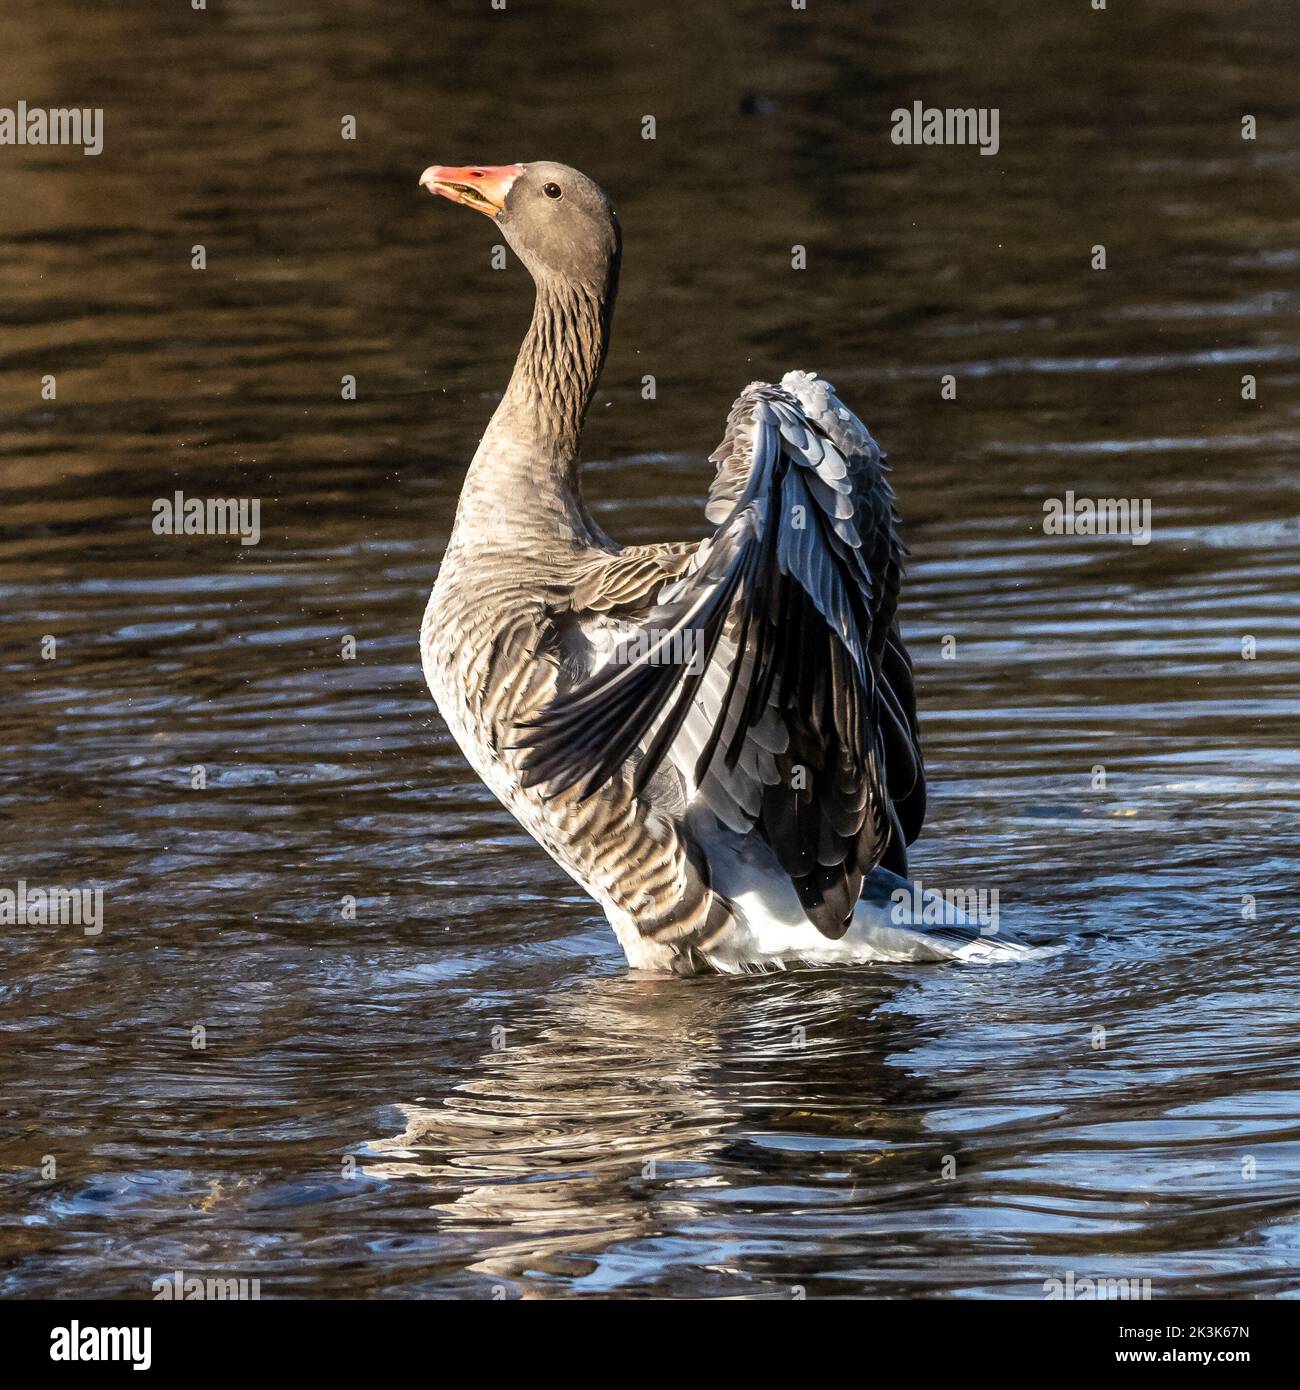 The greylag goose, Anser anser is a species of large goose in the waterfowl family Anatidae and the type species of the genus Anser. Stock Photo